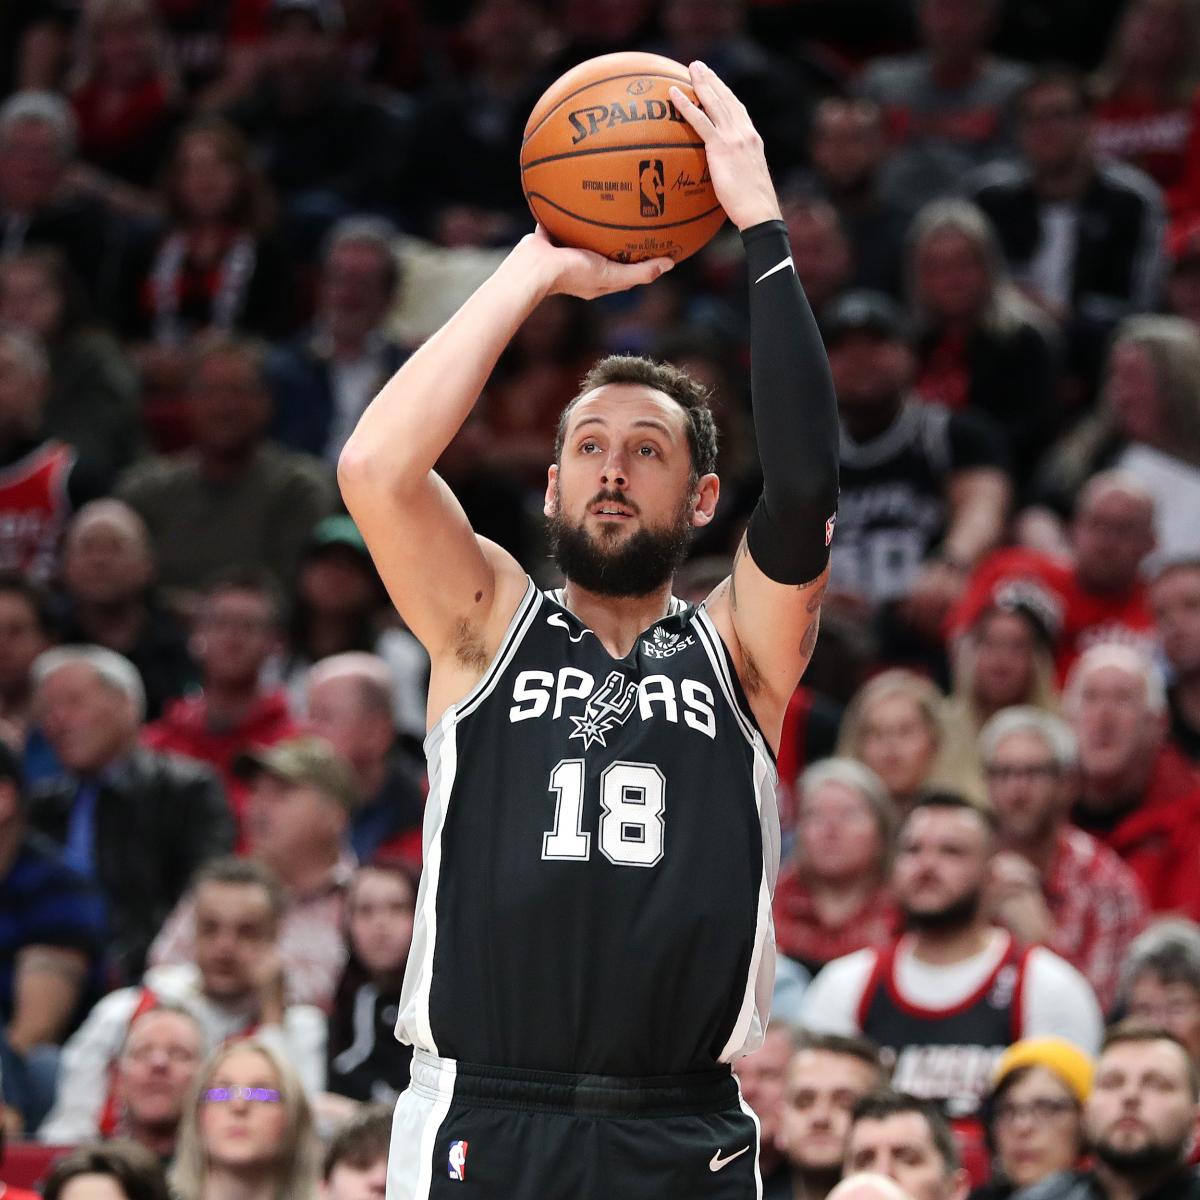 Marco Belinelli signs three-year deal in Italy after NBA career